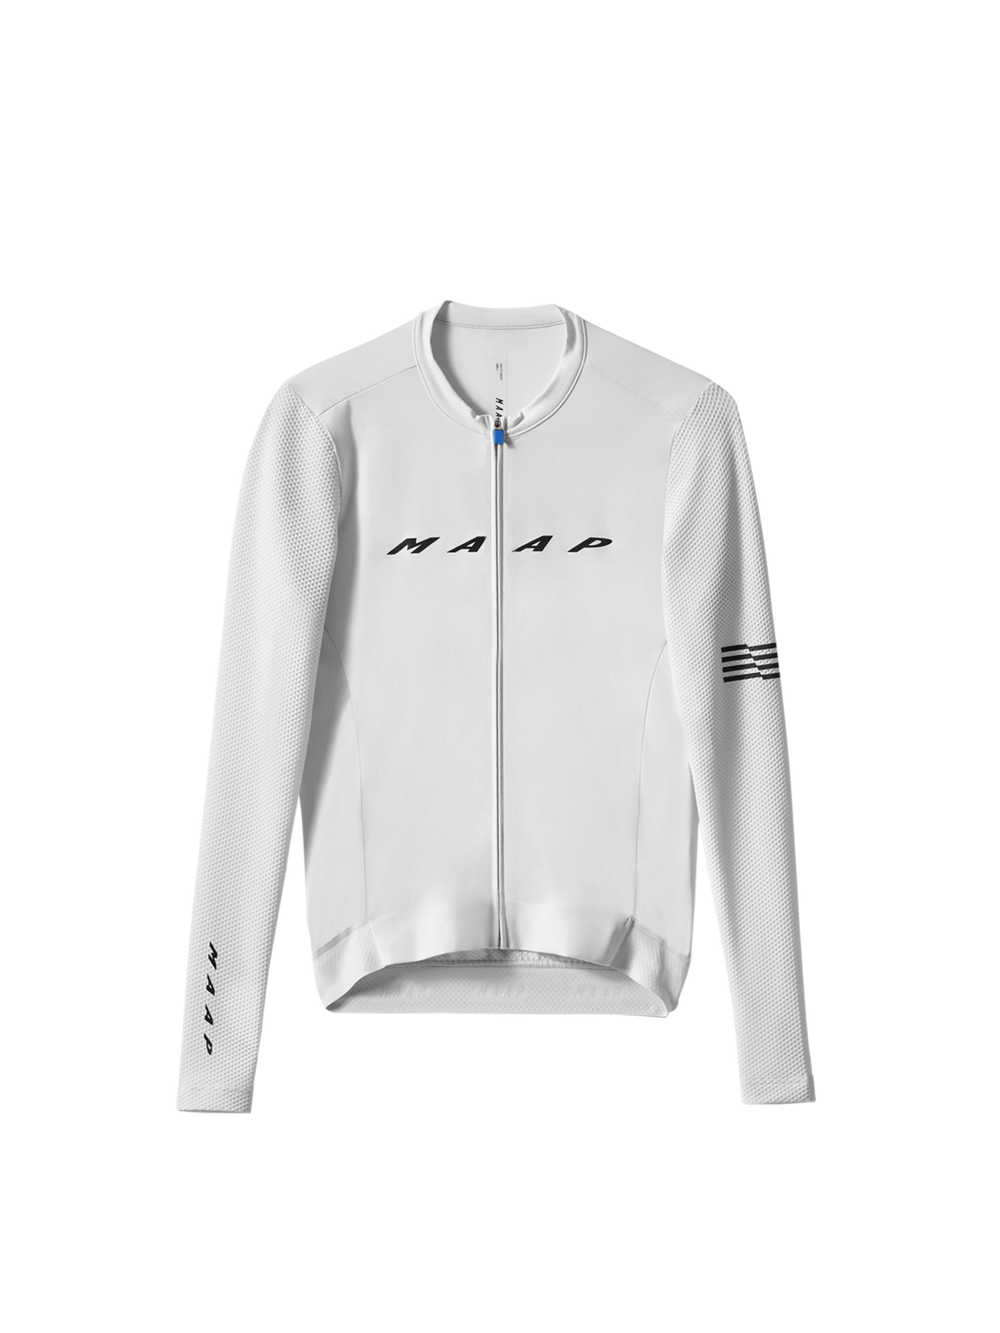 Product Image for Evade Pro Base LS Jersey 2.0